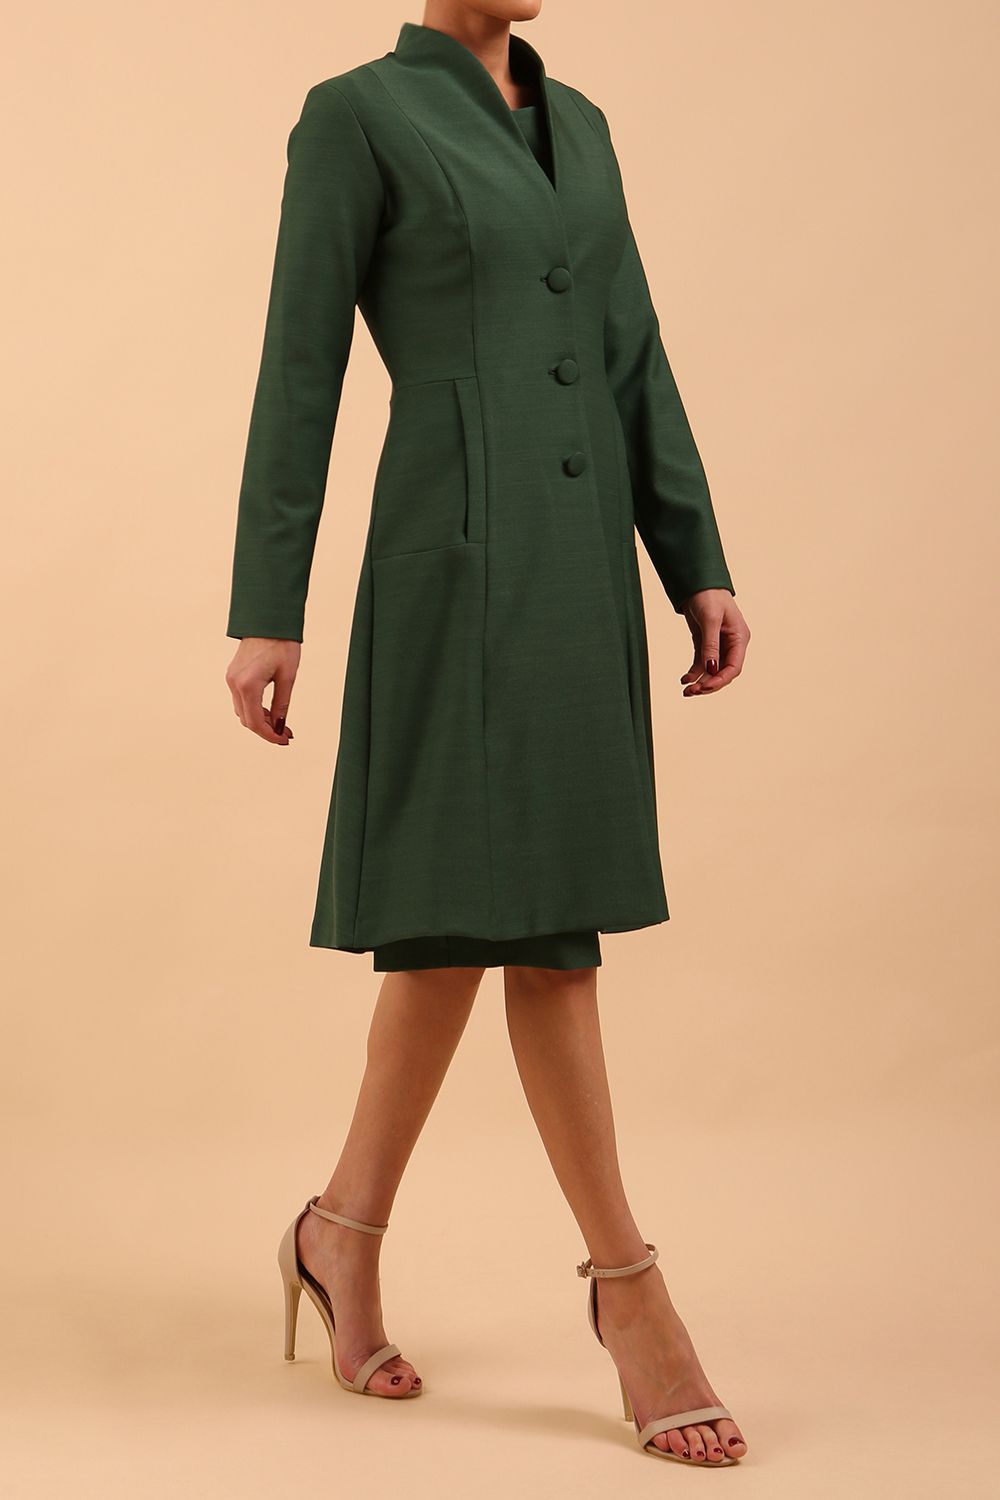 brunette model wearing diva catwalk couture fine raquella coat with buttons across the front and long sleeves with high neck and pockets in chrome green colour front side